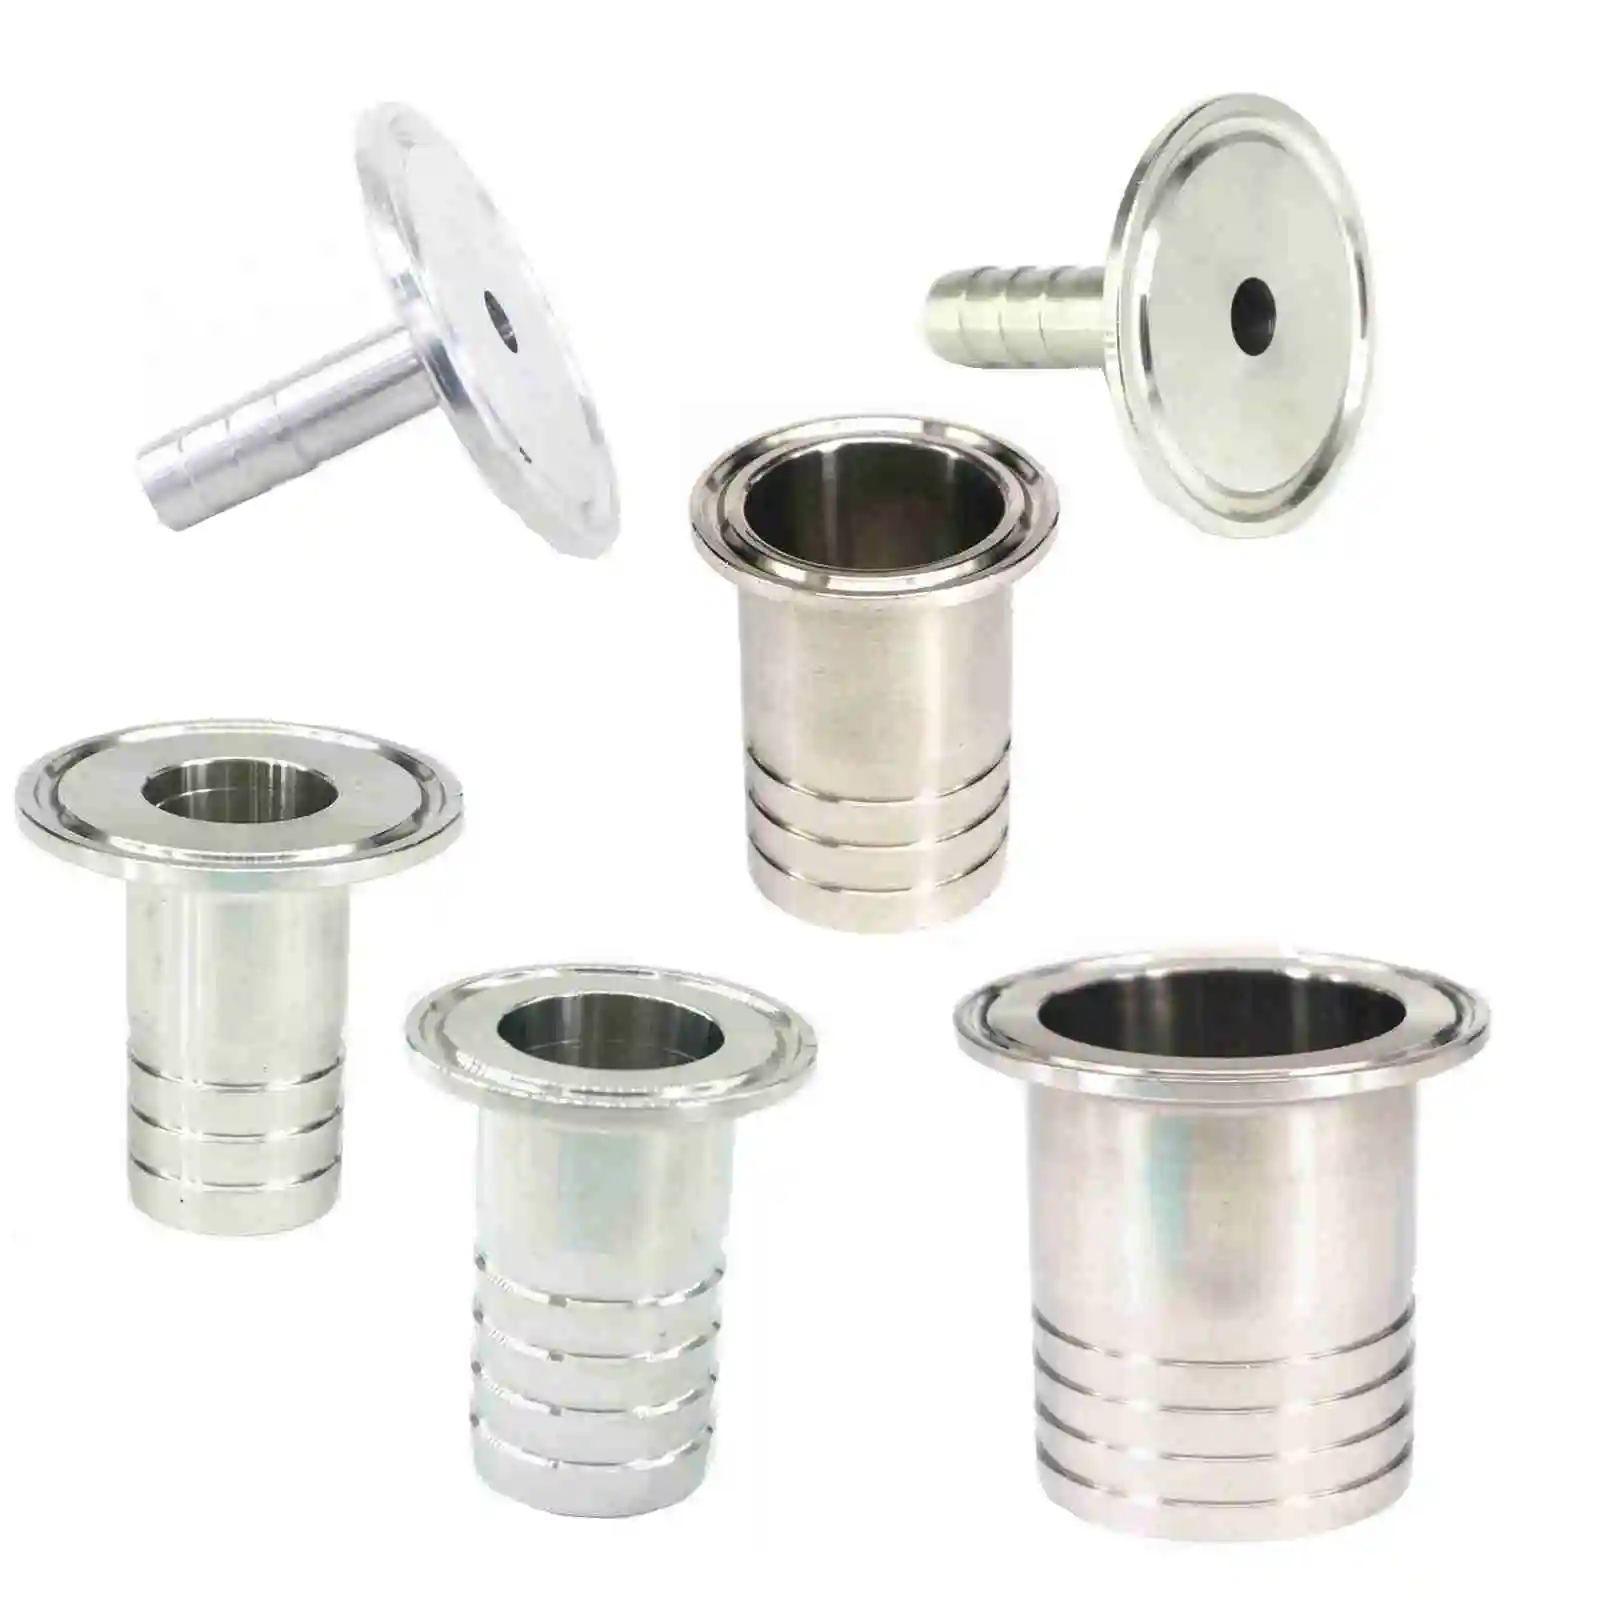 Fitting+Tri Clamp+Gasket 10-89mm Barbed 304 Stainless Steel Sanitary Set Adapter 